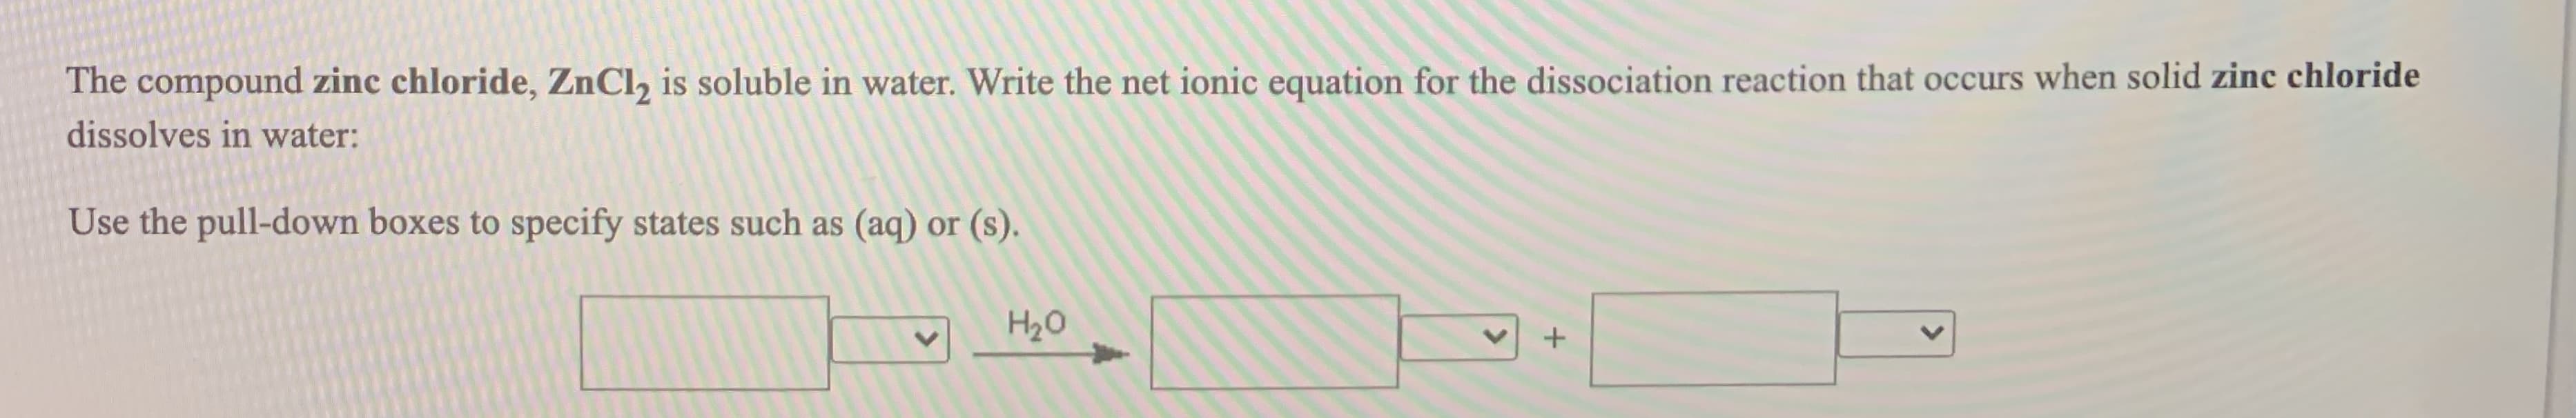 The compound zinc chloride, ZnCl, is soluble in water. Write the net ionic equation for the dissociation reaction that occurs when solid zinc chloride
dissolves in water:
Use the pull-down boxes to specify states such as (aq) or (s).
H20
